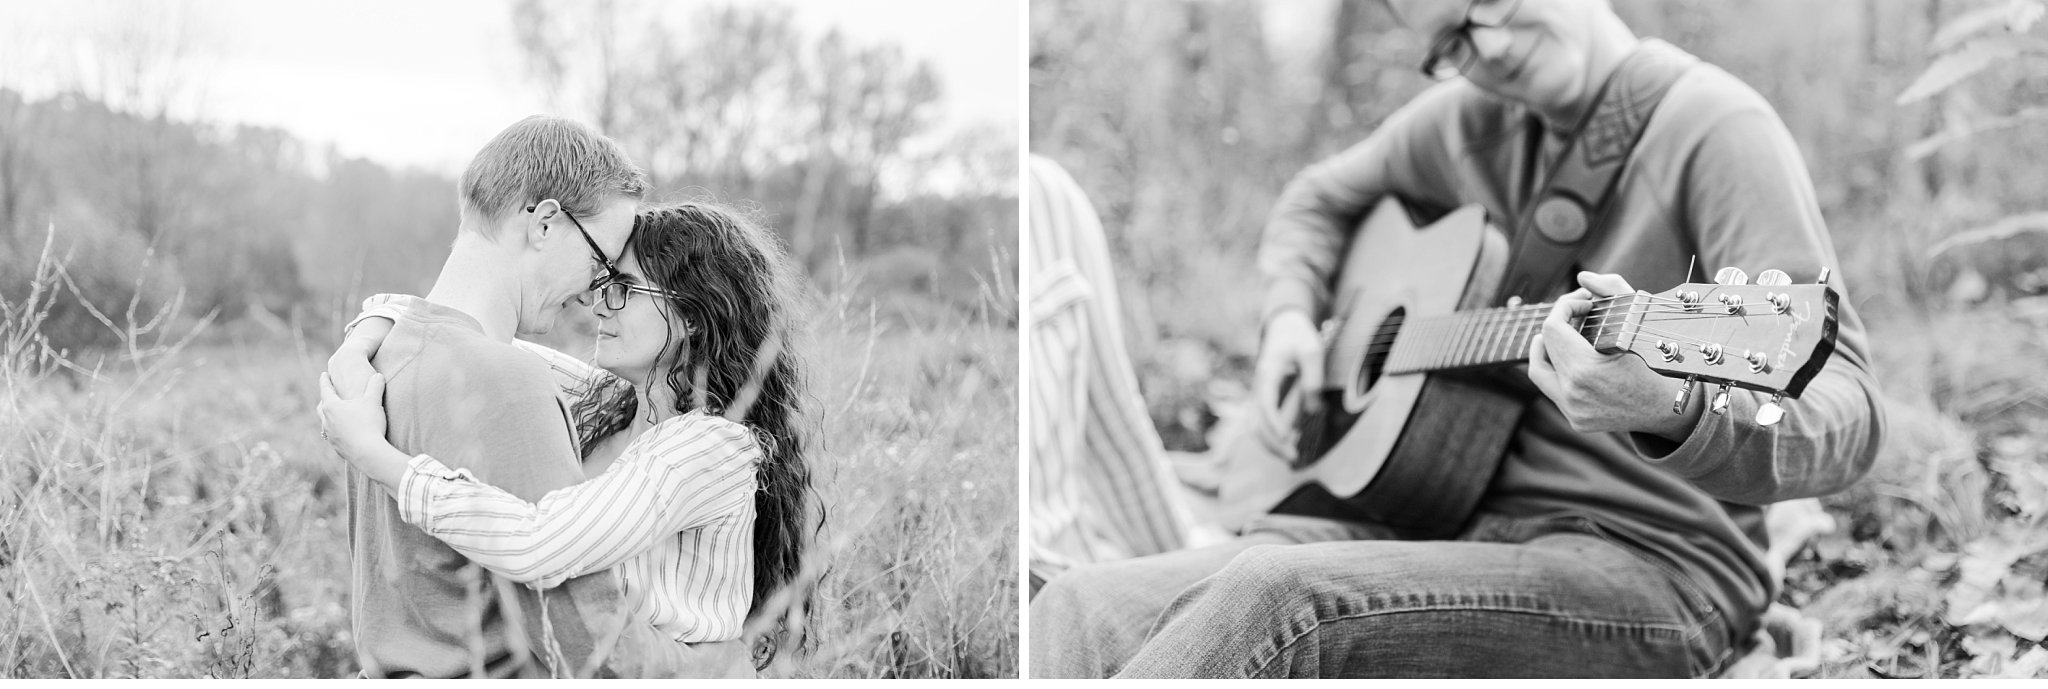 A couple together in a field and a close-up photo of a man playing a guitar